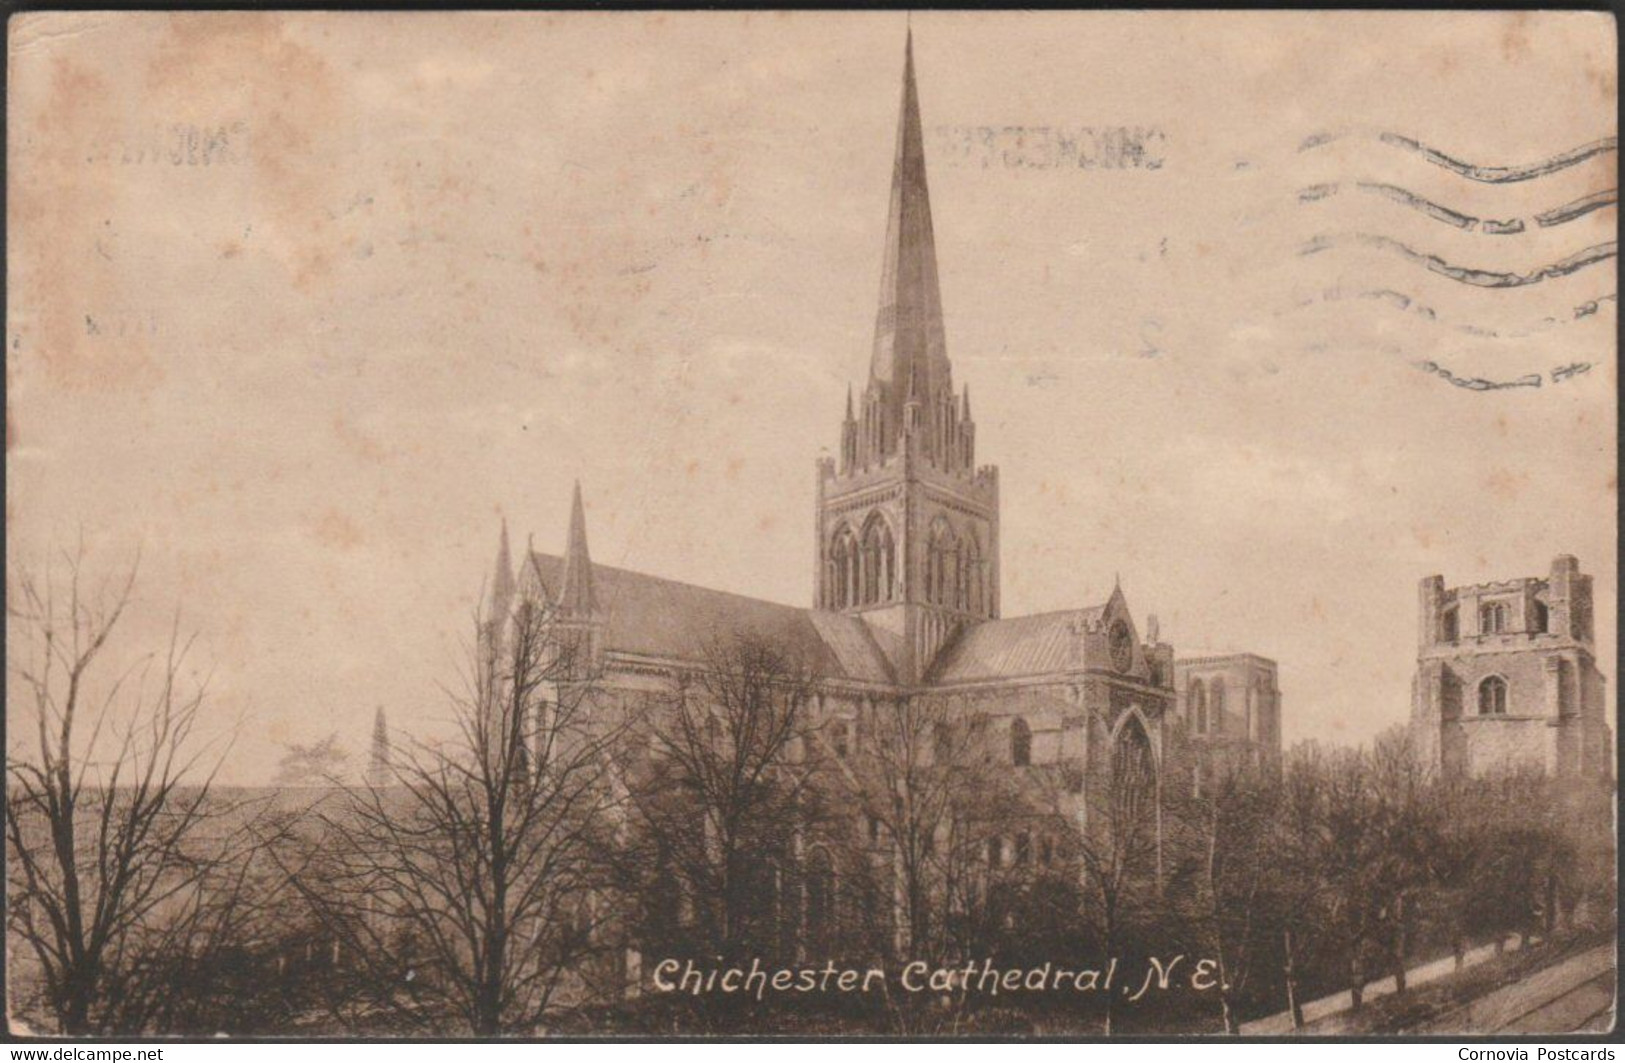 North East, Chichester Cathedral, Sussex, 1925 - Frith's Postcard - Chichester